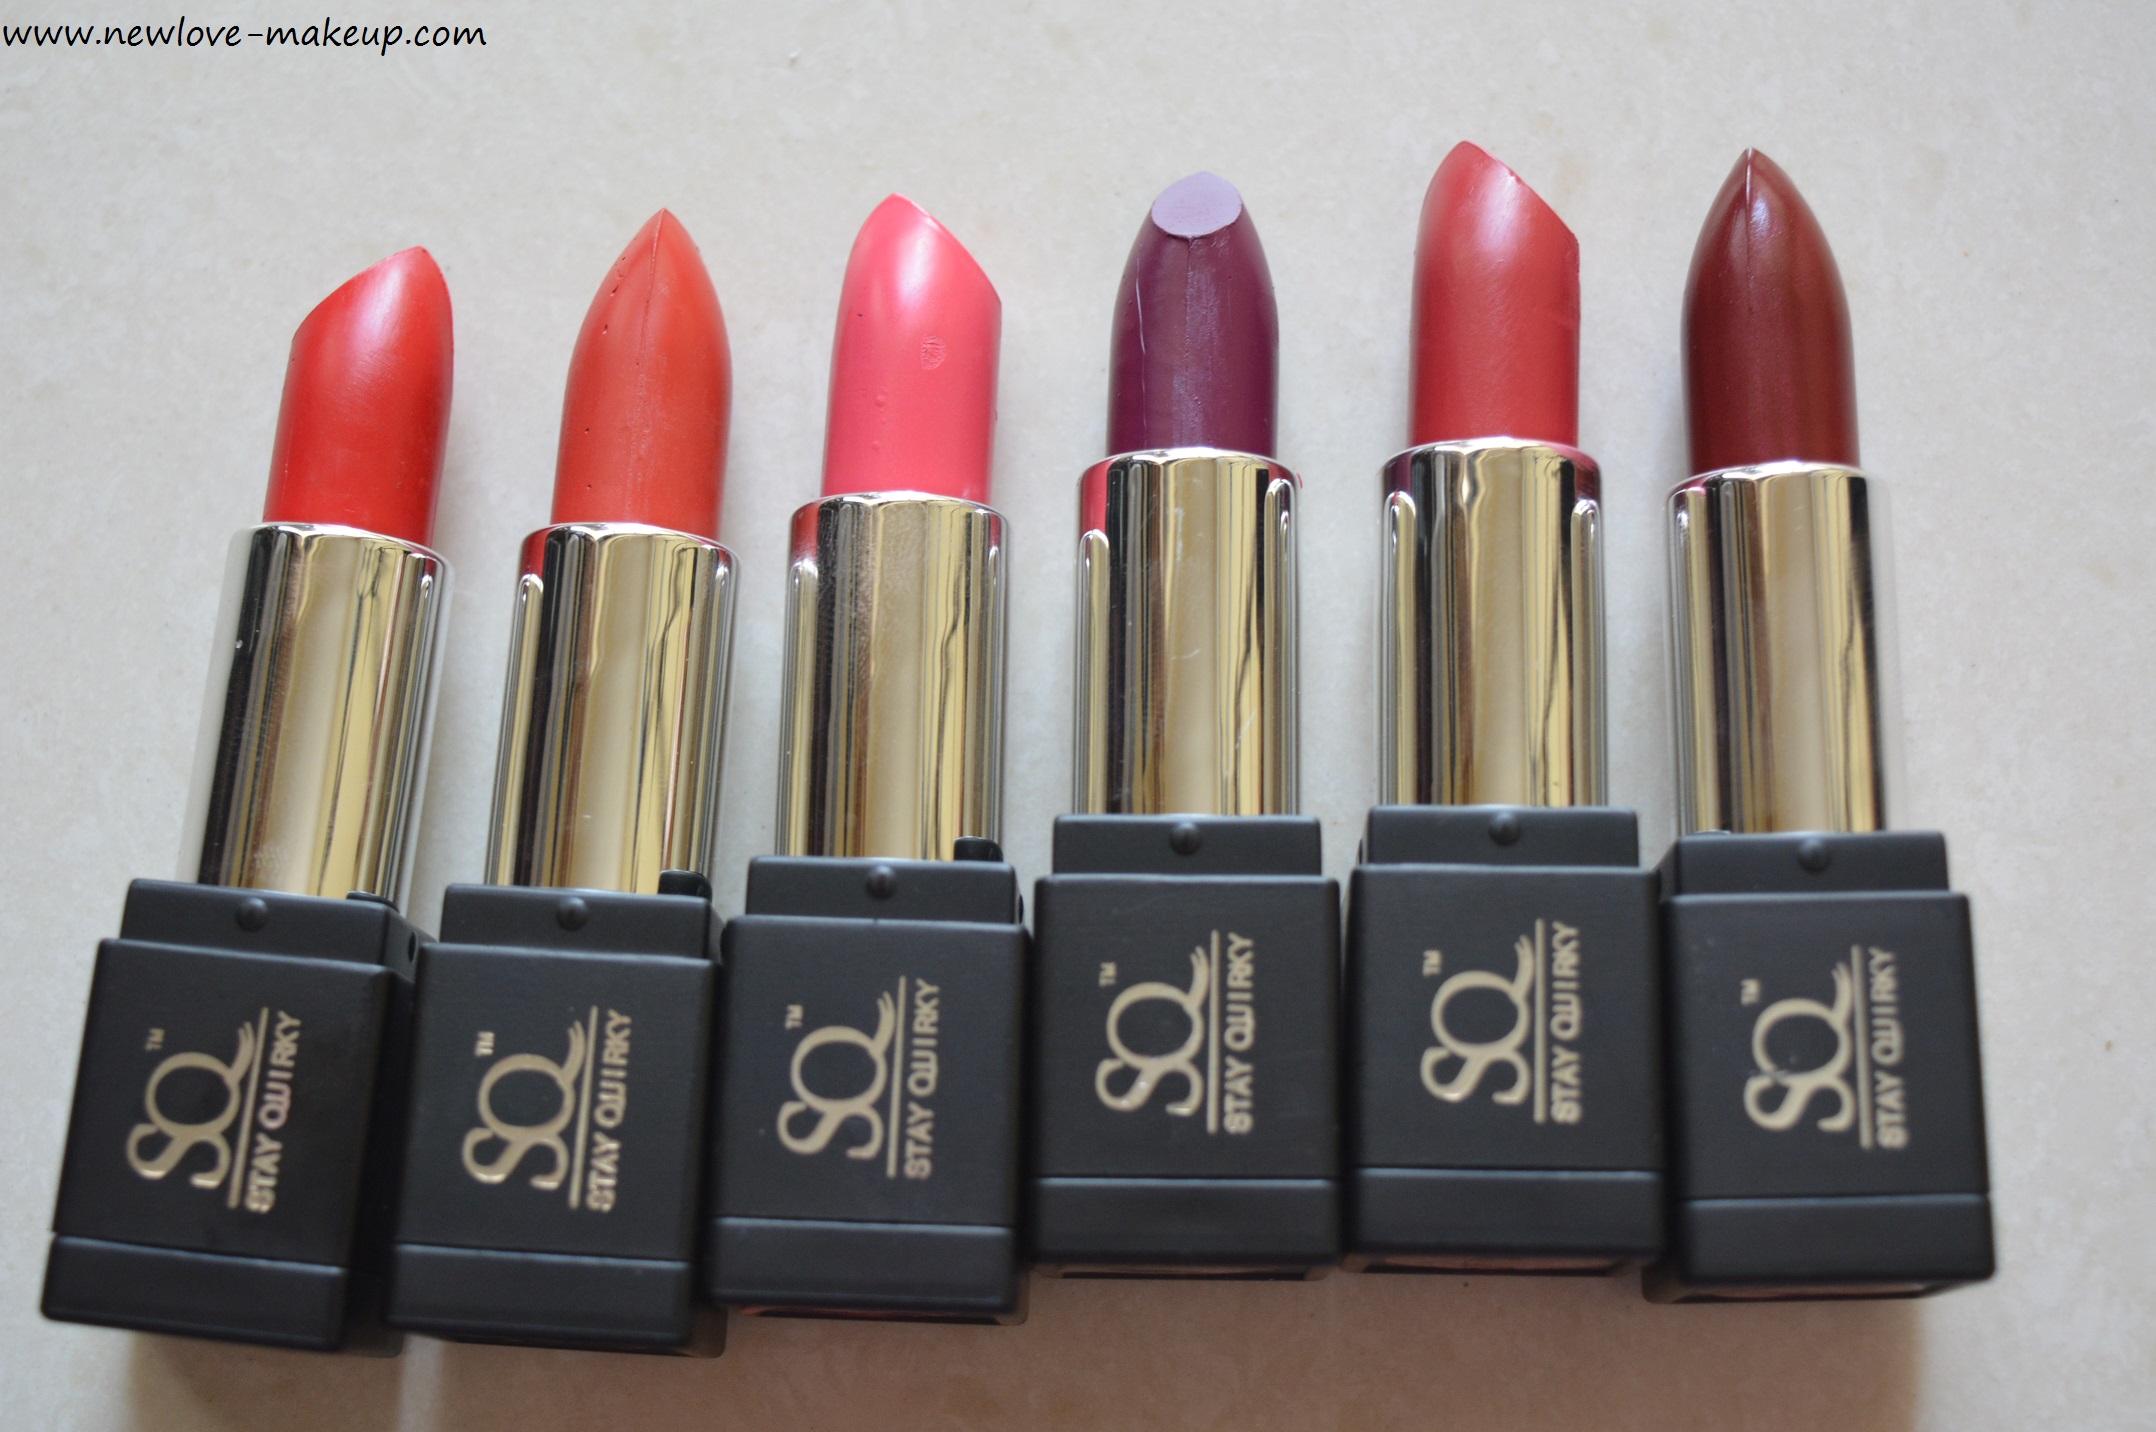 Stay Quirky BadAss Lipsticks Review, All Swatches